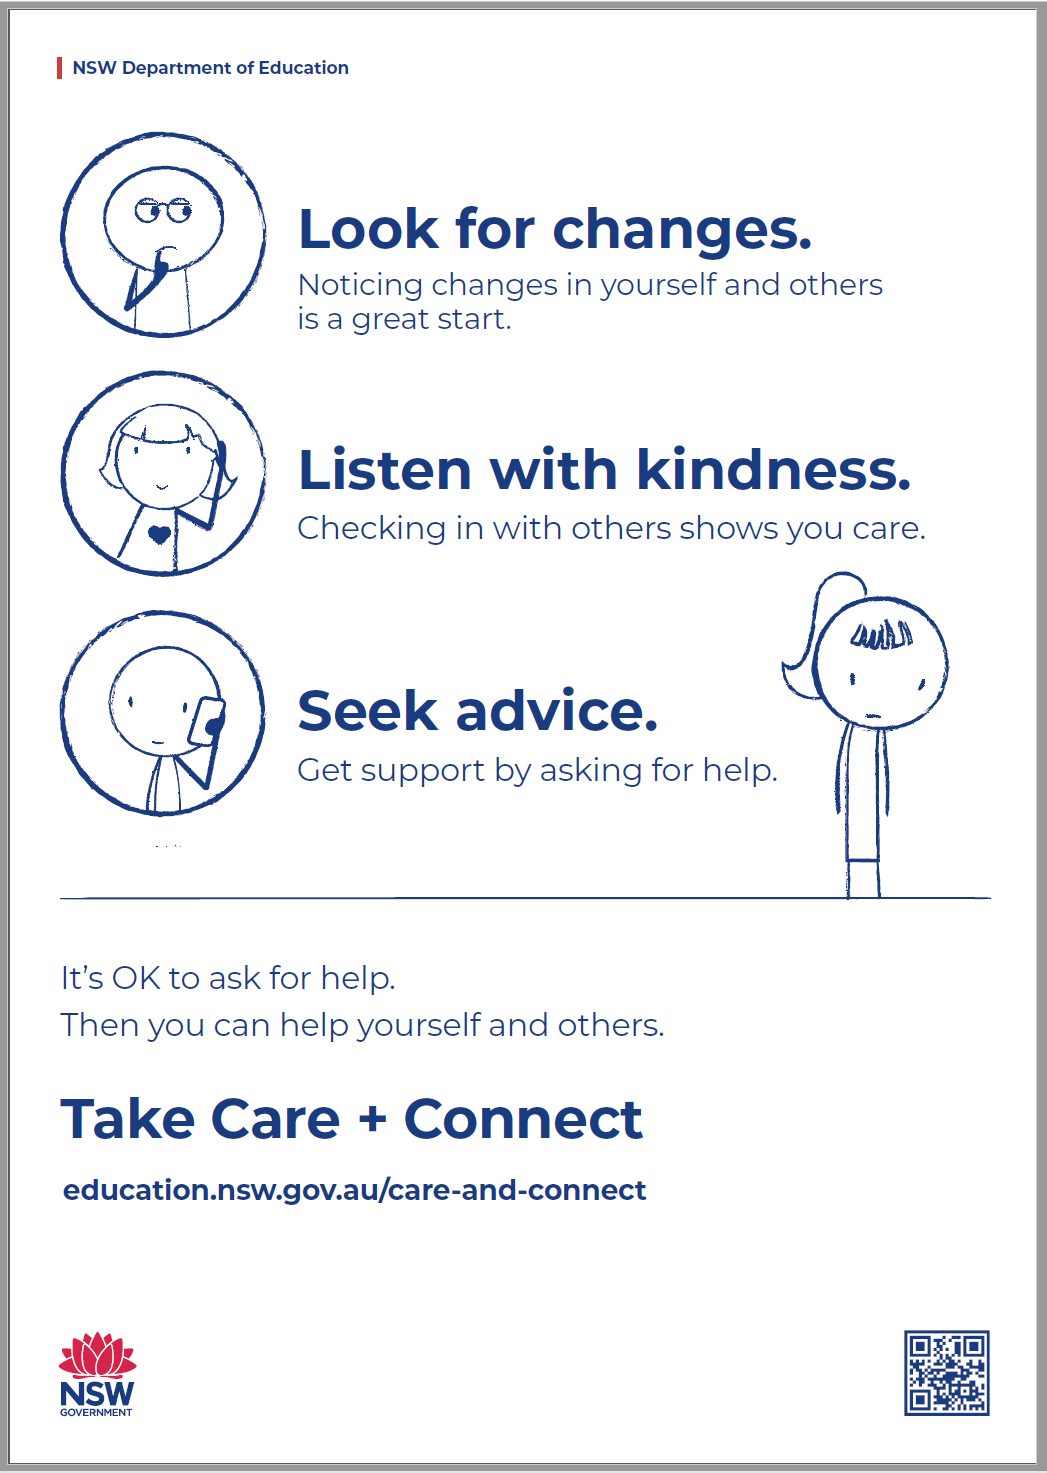 The Care and Connect instructional poster thumbnail, featuring some text - Look for changes, listen with kindness and seek advice.